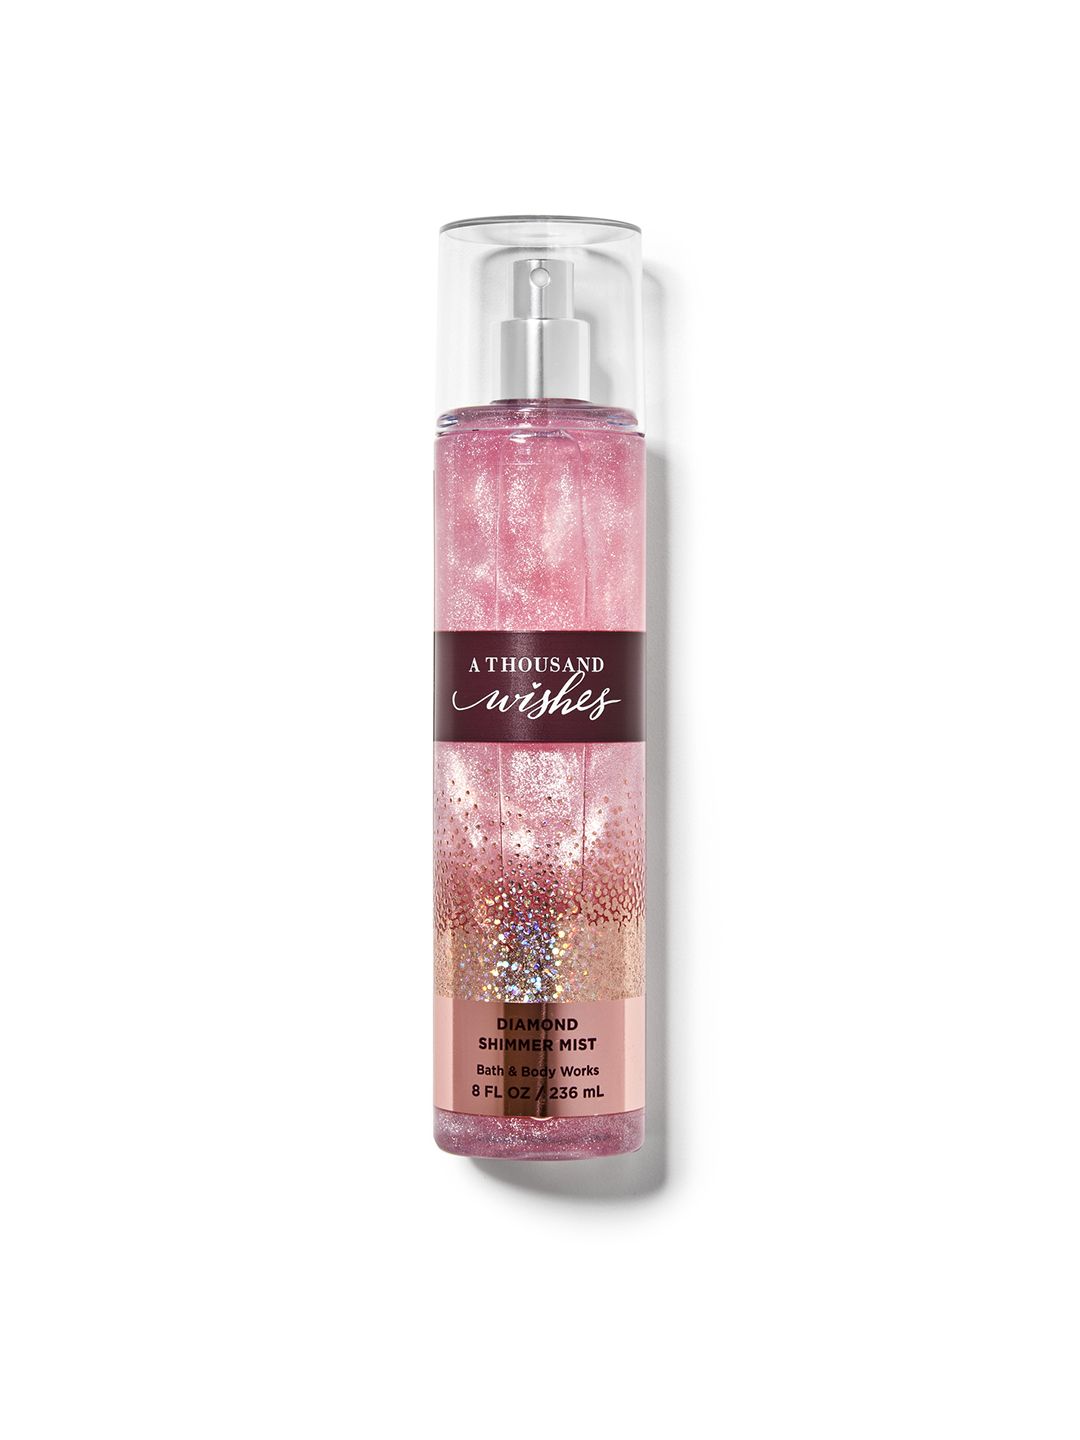 Bath & Body Works A Thousand Wishes Diamond Shimmer Body Mist - 236 ml Price in India